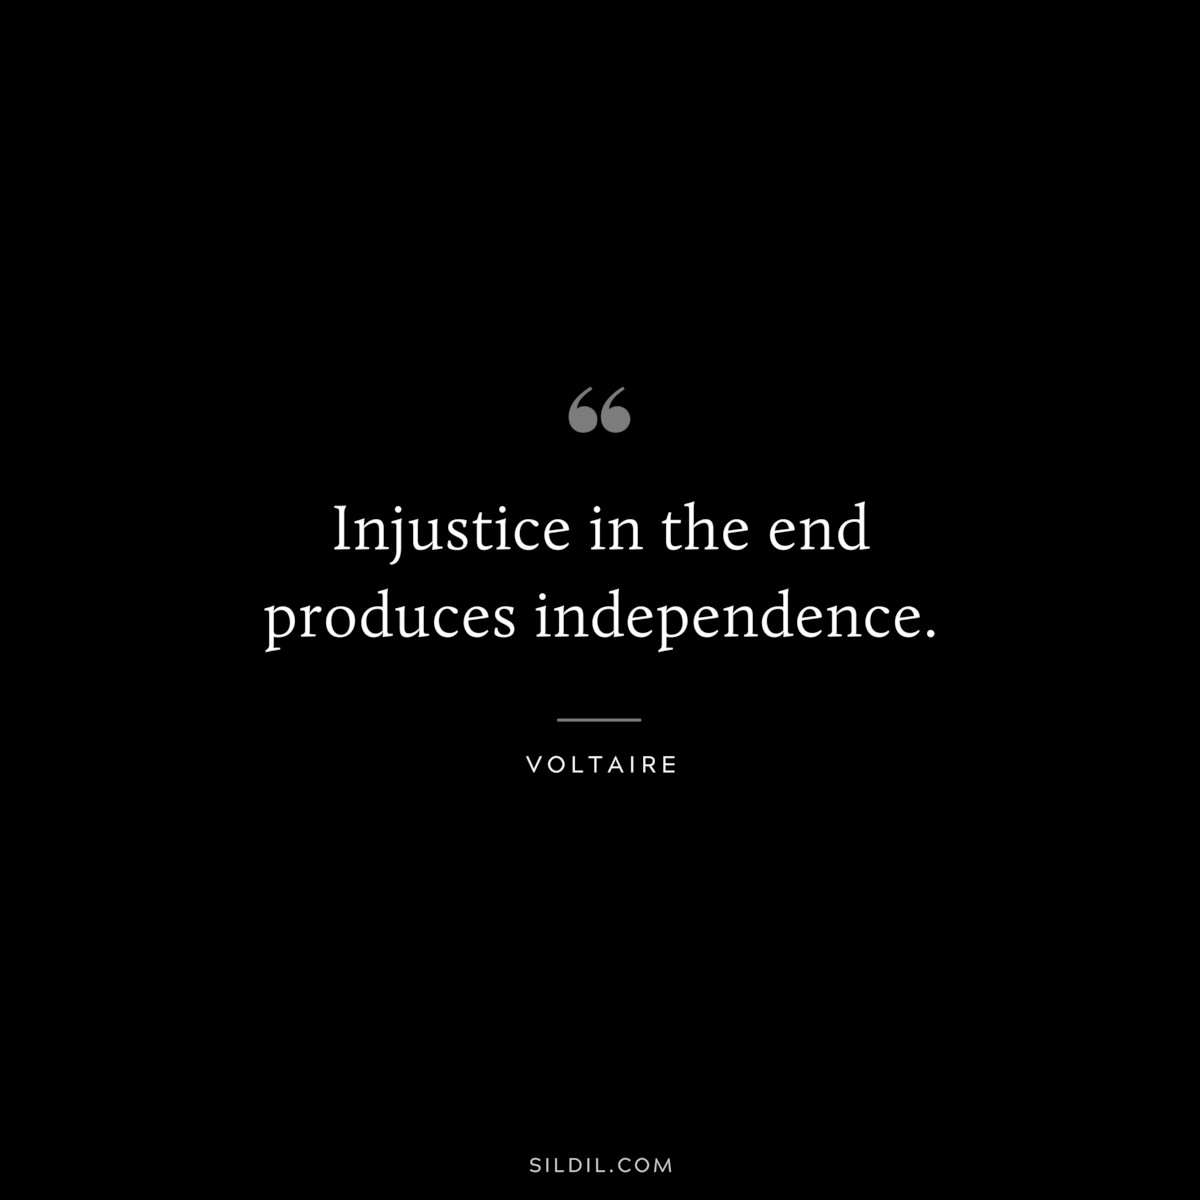 Injustice in the end produces independence. ― Voltaire